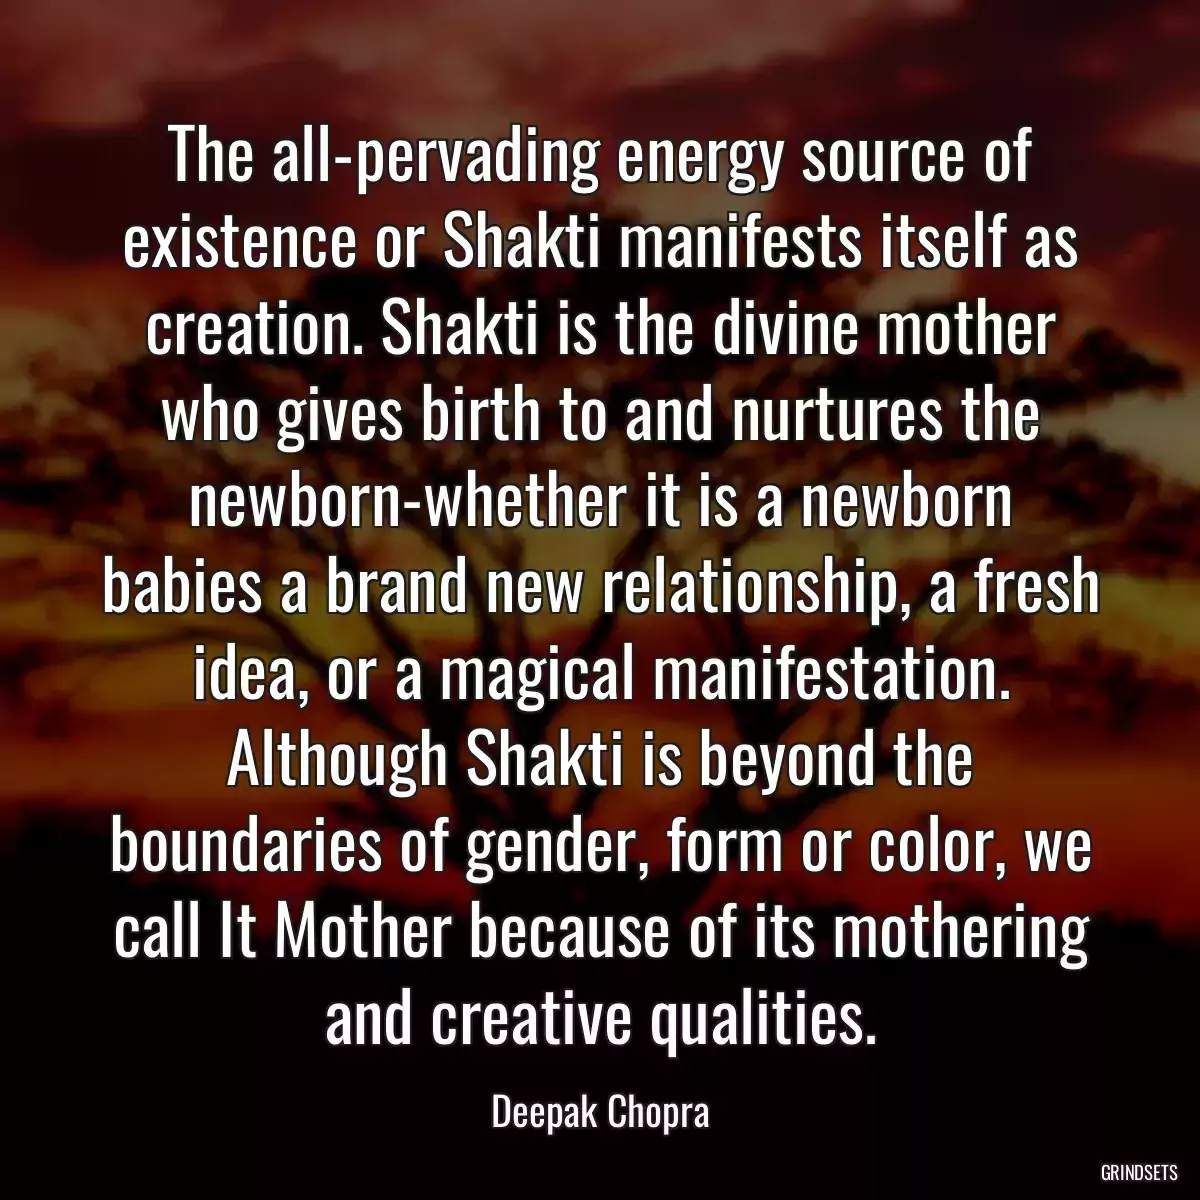 The all-pervading energy source of existence or Shakti manifests itself as creation. Shakti is the divine mother who gives birth to and nurtures the newborn-whether it is a newborn babies a brand new relationship, a fresh idea, or a magical manifestation. Although Shakti is beyond the boundaries of gender, form or color, we call It Mother because of its mothering and creative qualities.